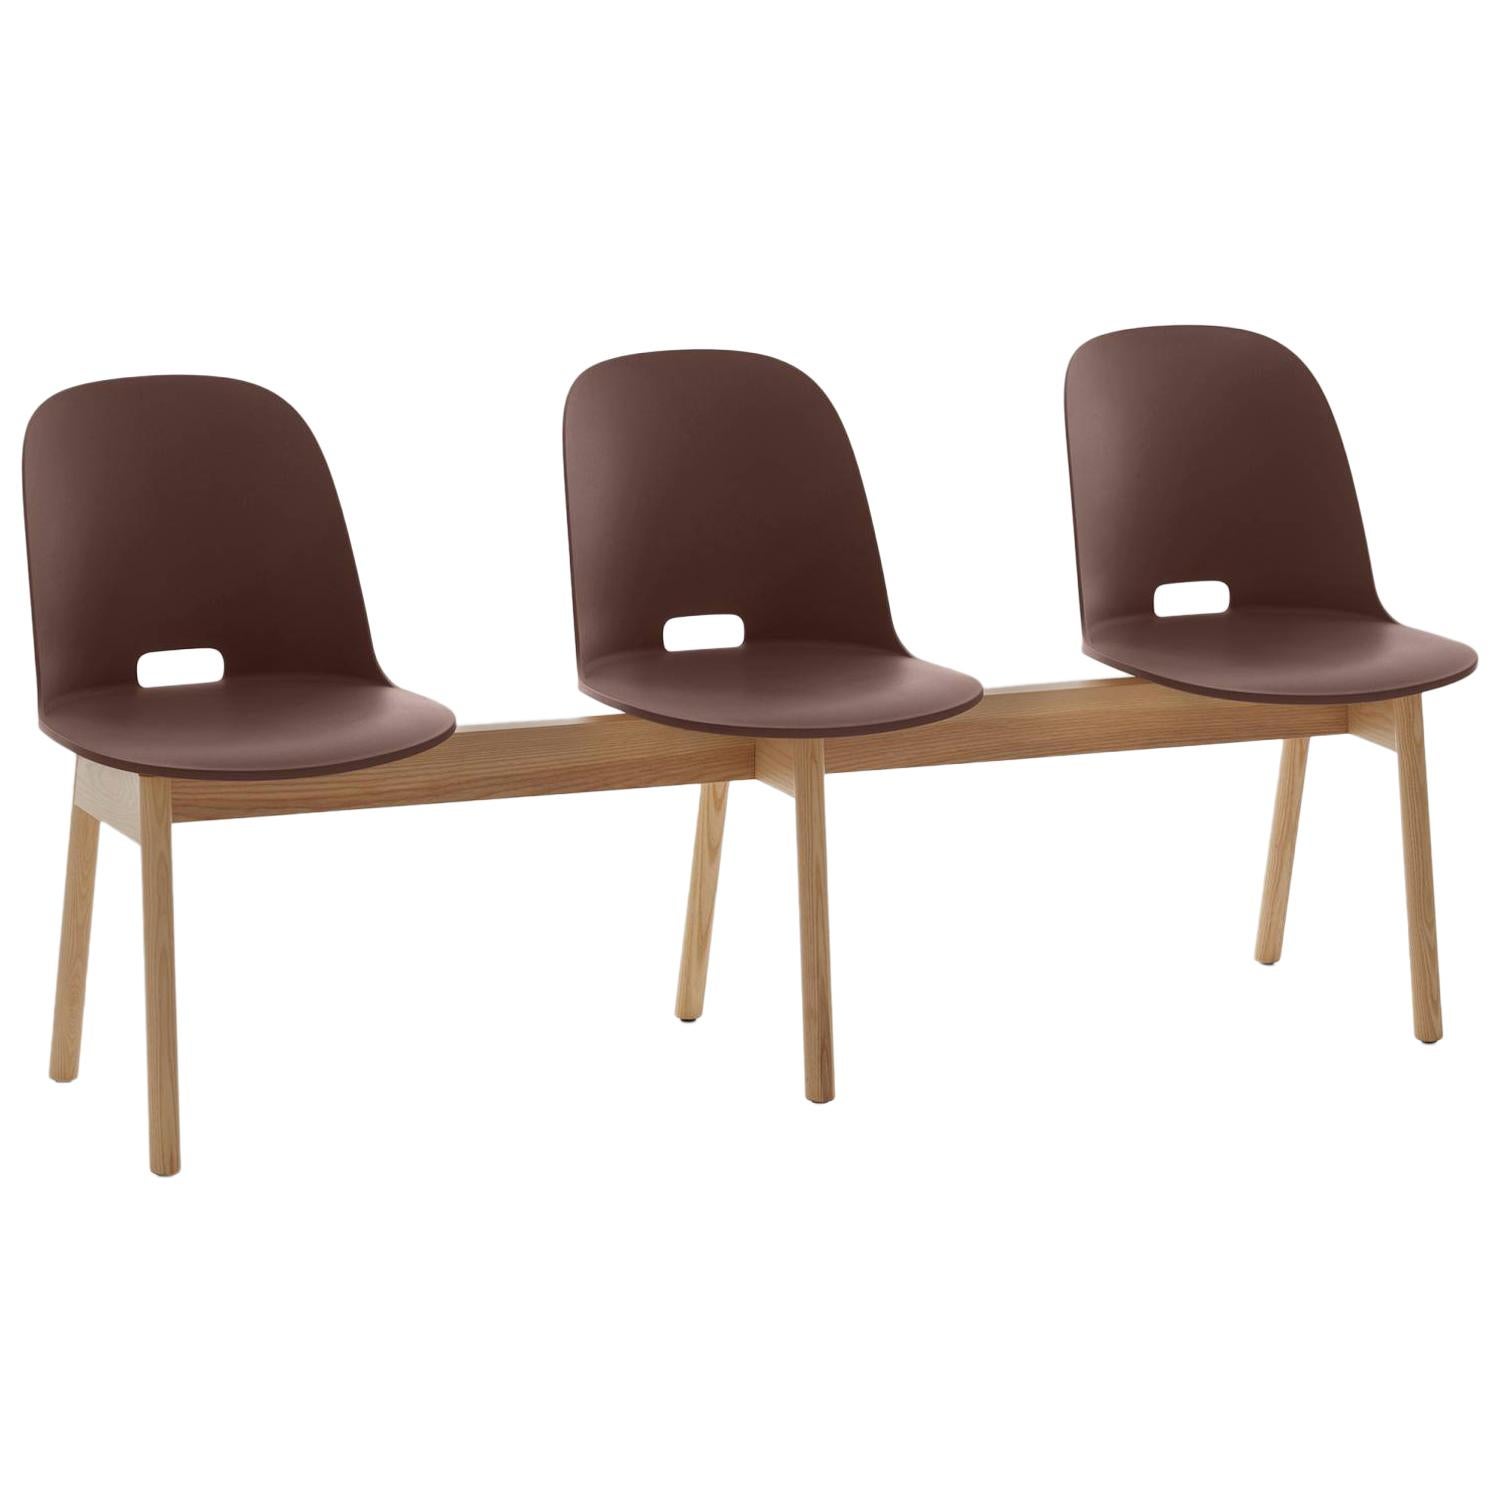 Emeco Alfi 3-Seat Bench in Brown and Ash with High Back by Jasper Morrison